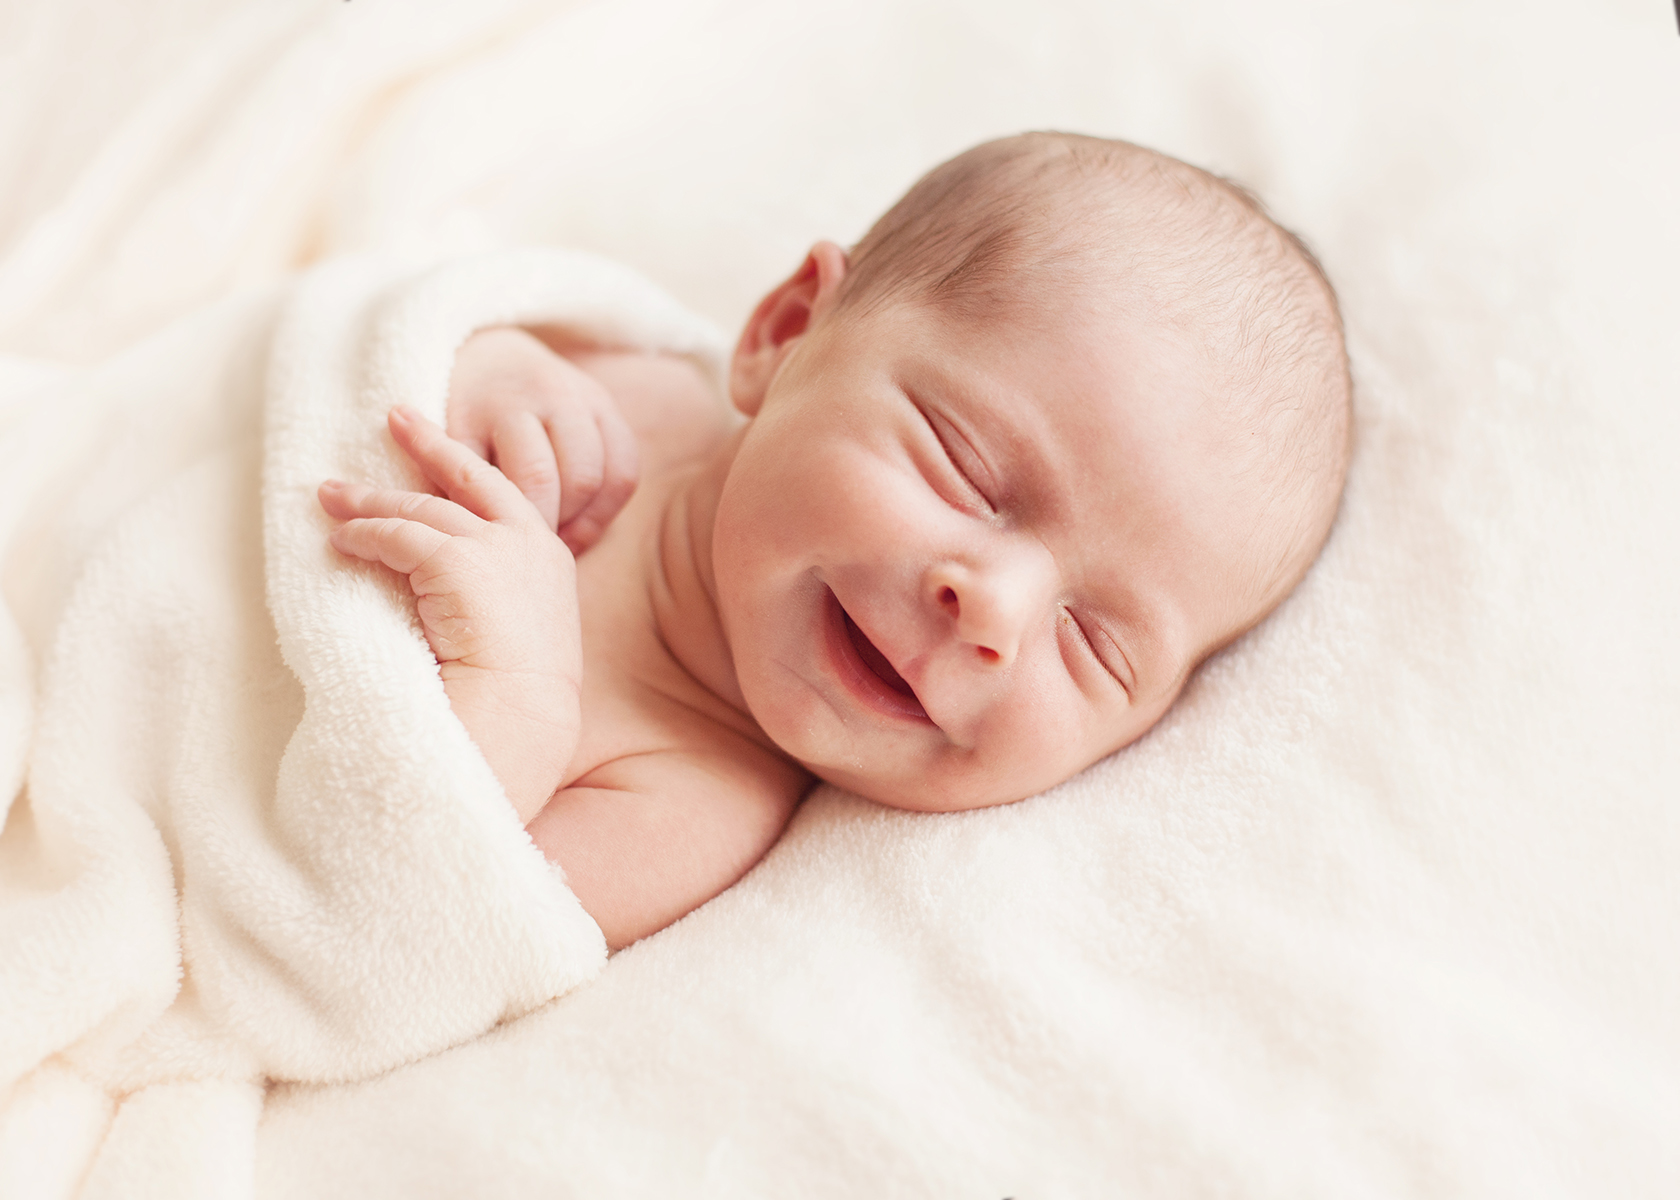 A newborn baby will urinate frequently